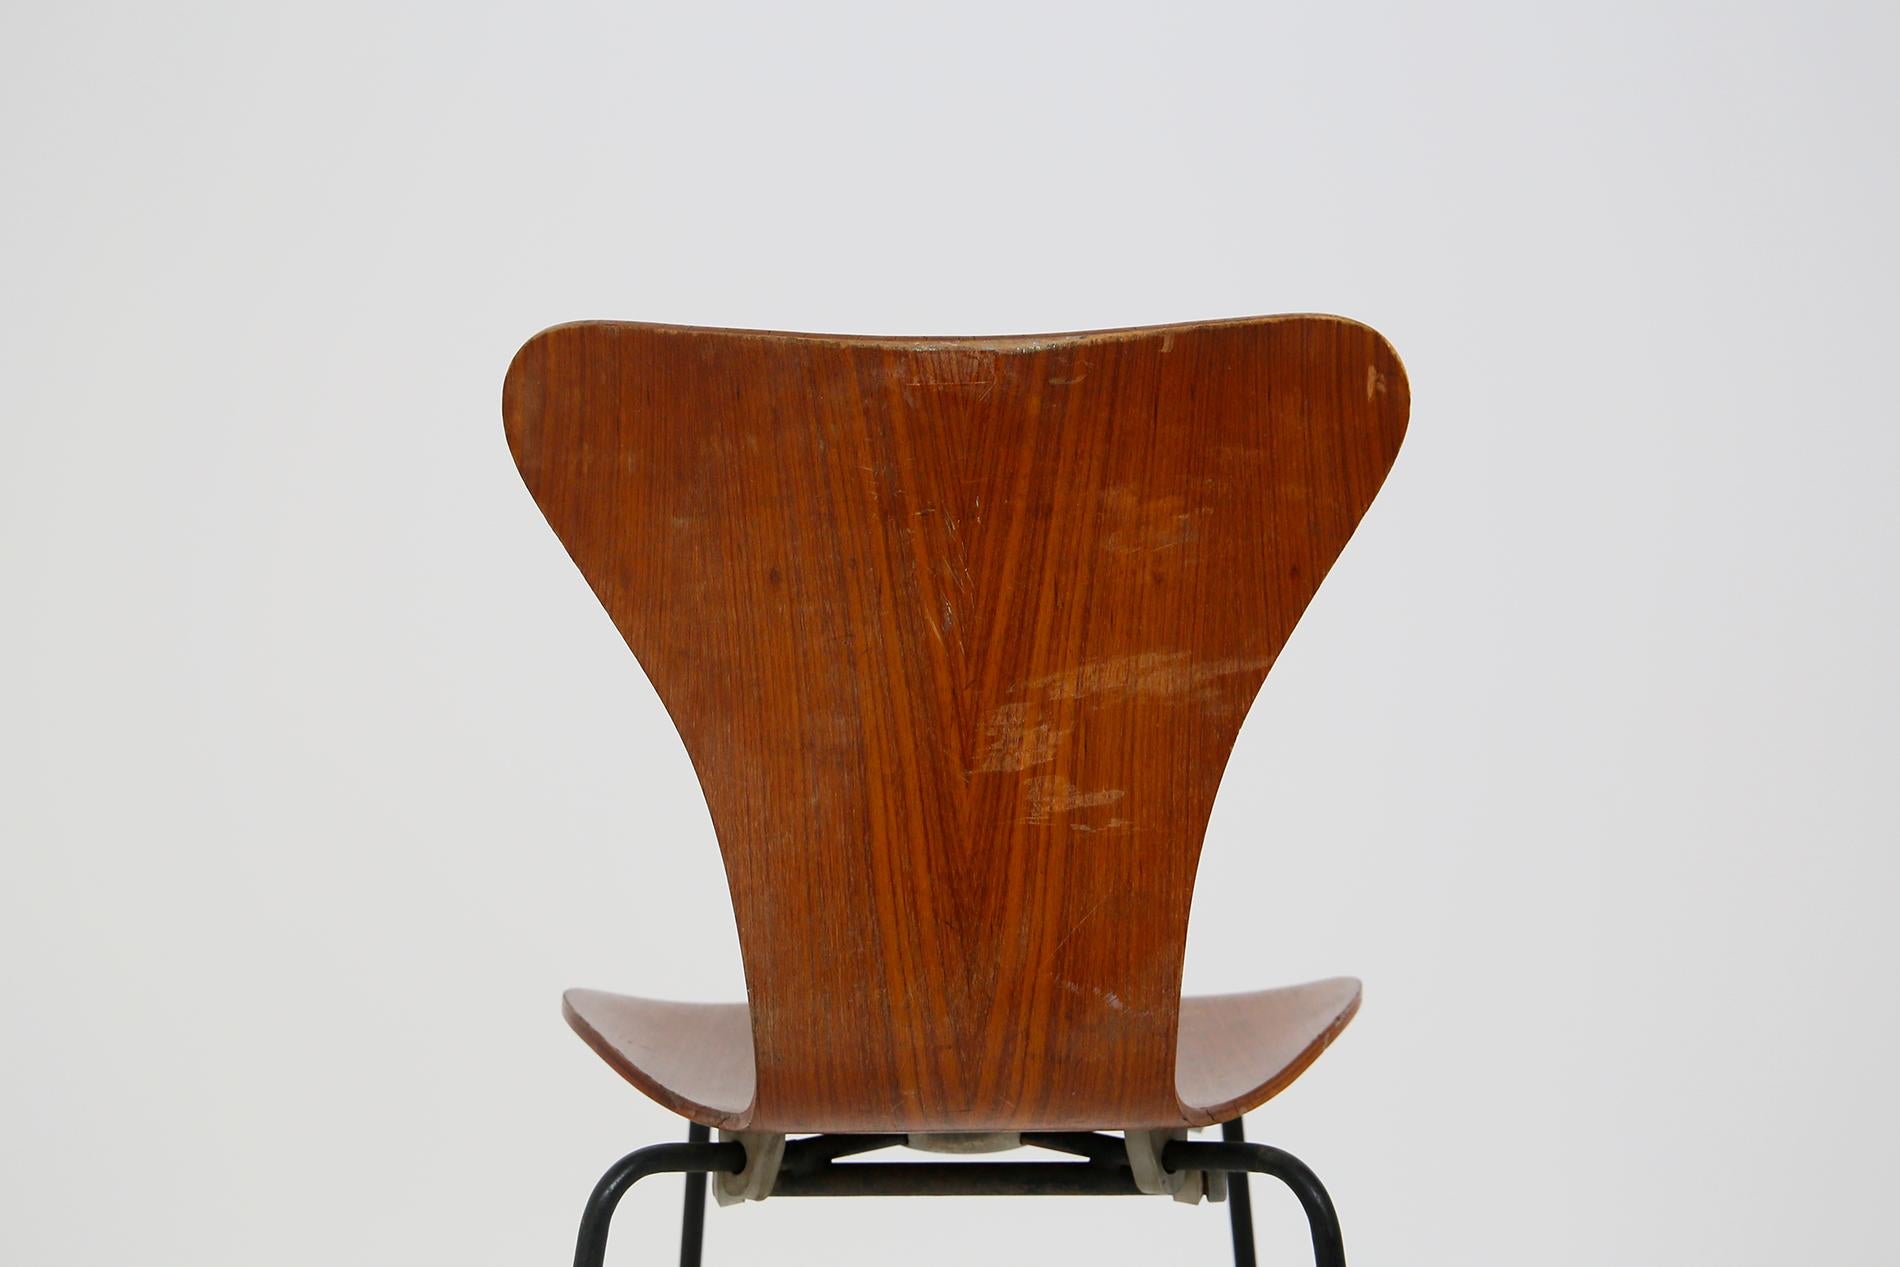 Danish Set of Six Chairs by Arne Jacobsen M. Butterfly for the Brazilian Airline, 1950s For Sale